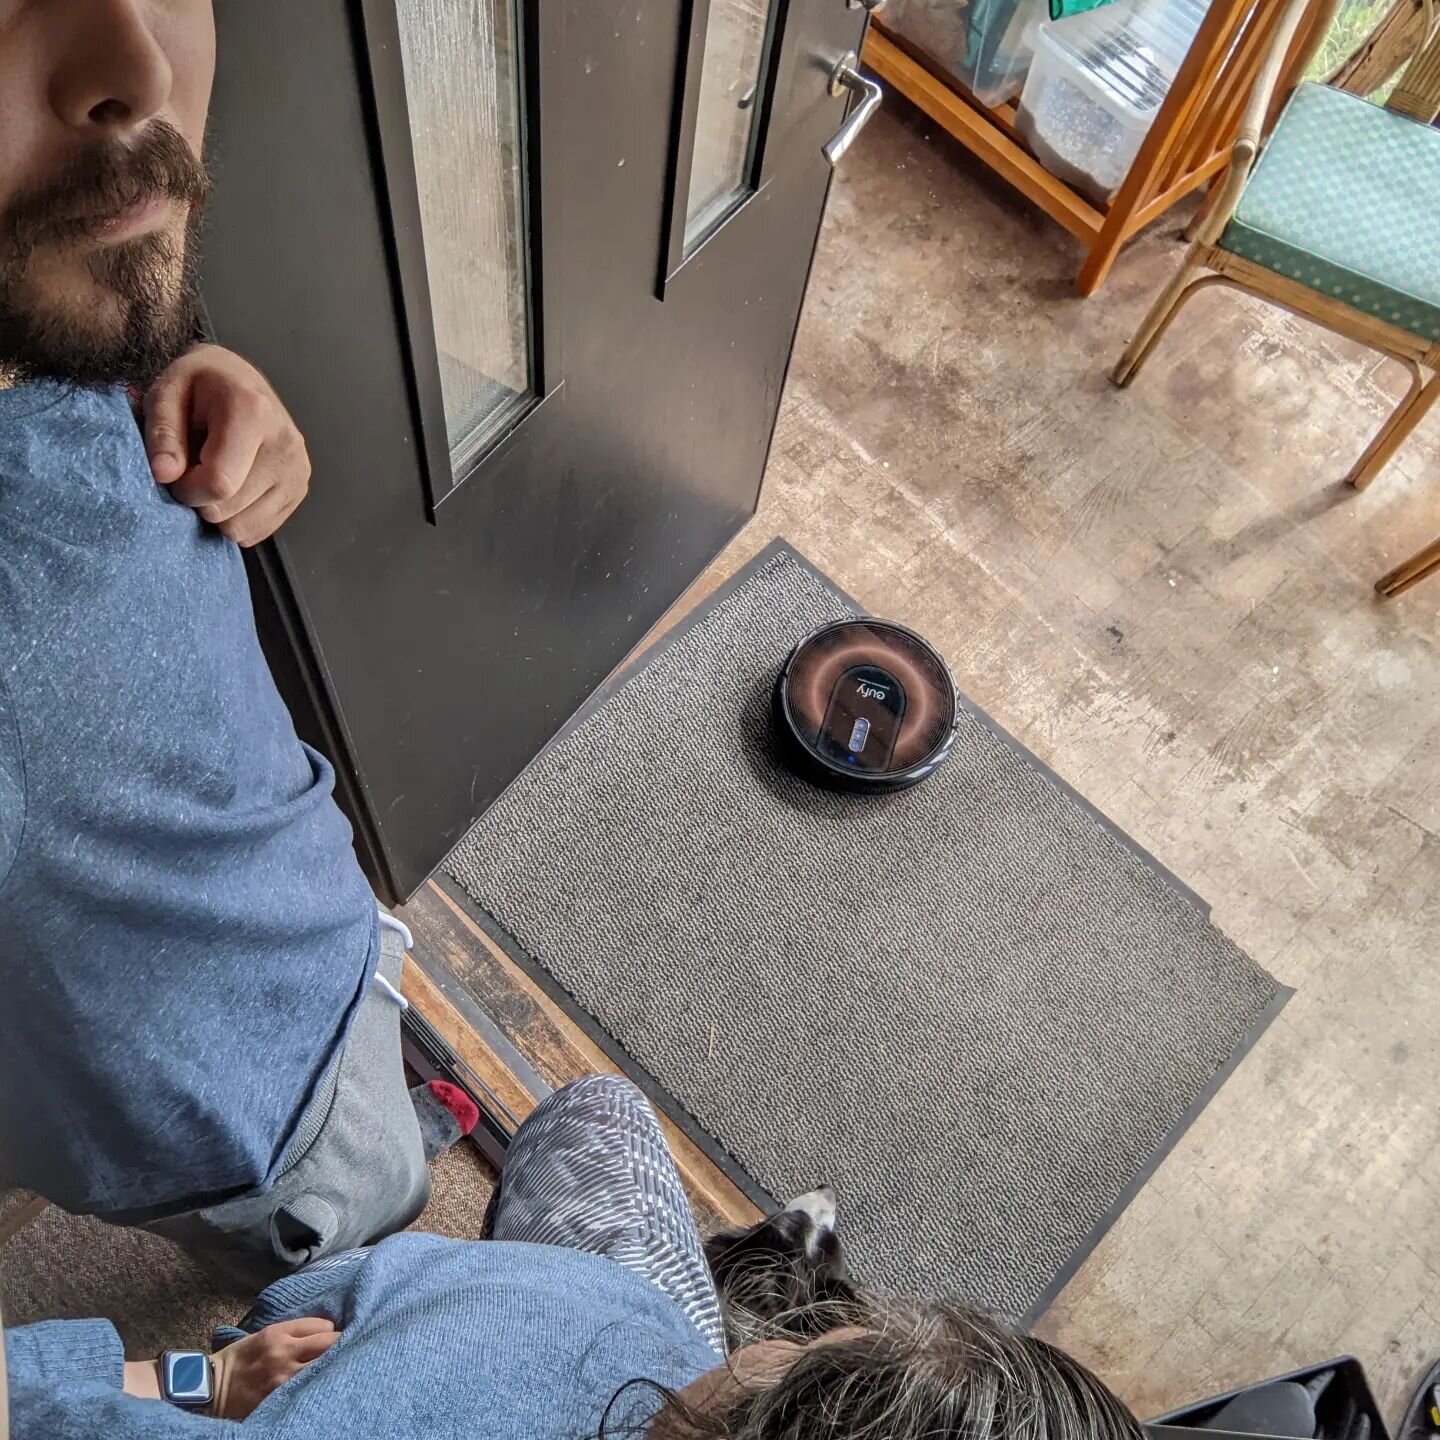 We now have a robo-vacuum (who we've named Jeeves, ofc), here is the whole household eagerly watching it do it's thing, defeating the point of automation....